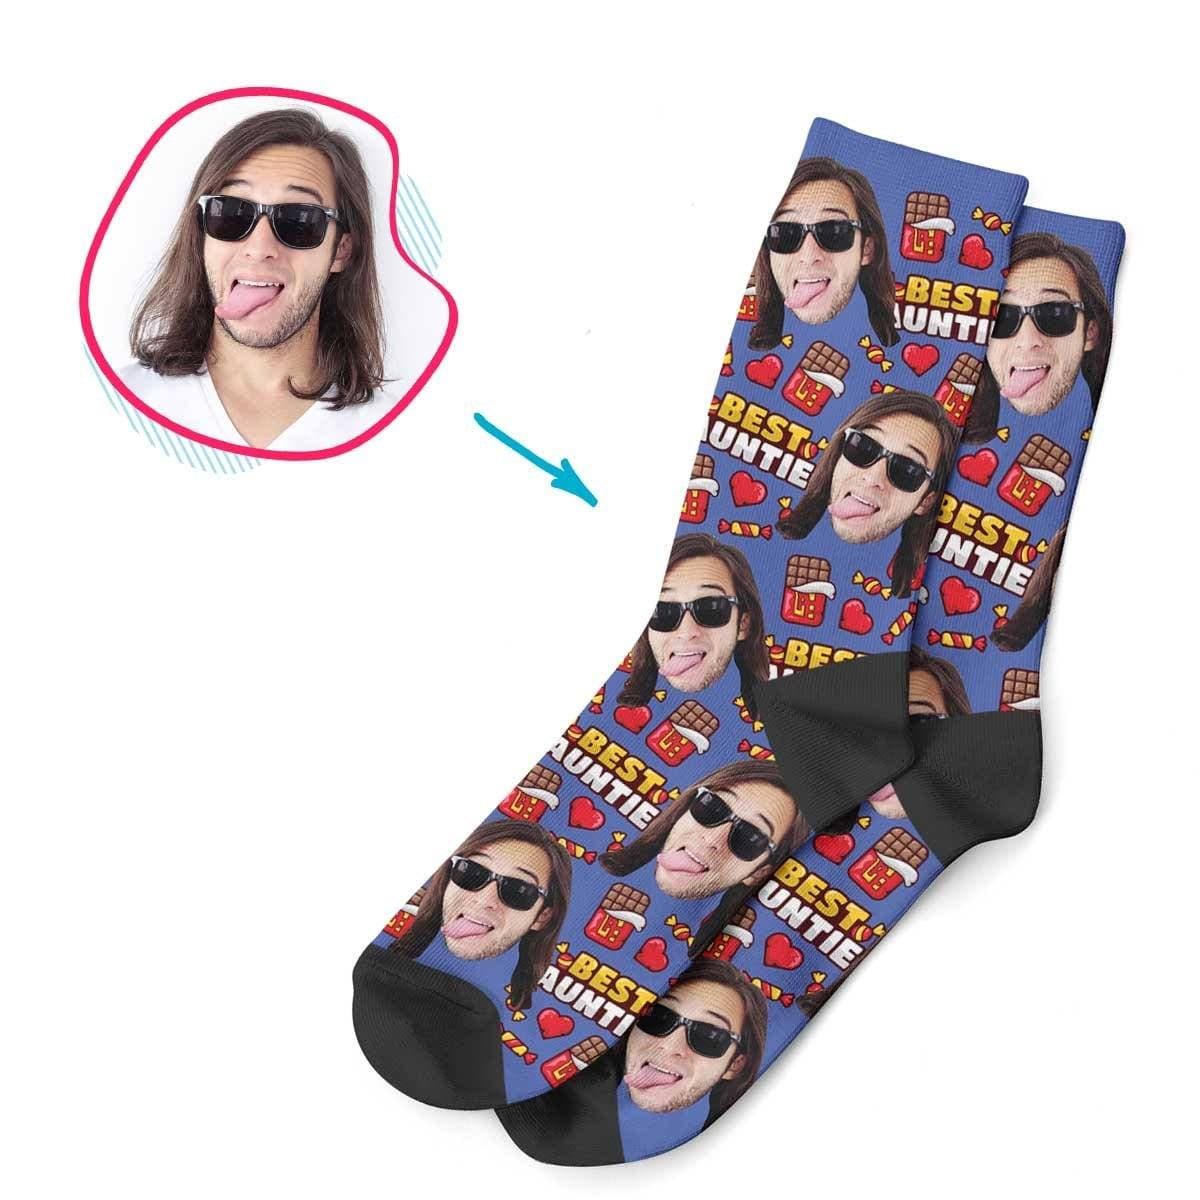 Darkblue Auntie personalized socks with photo of face printed on them